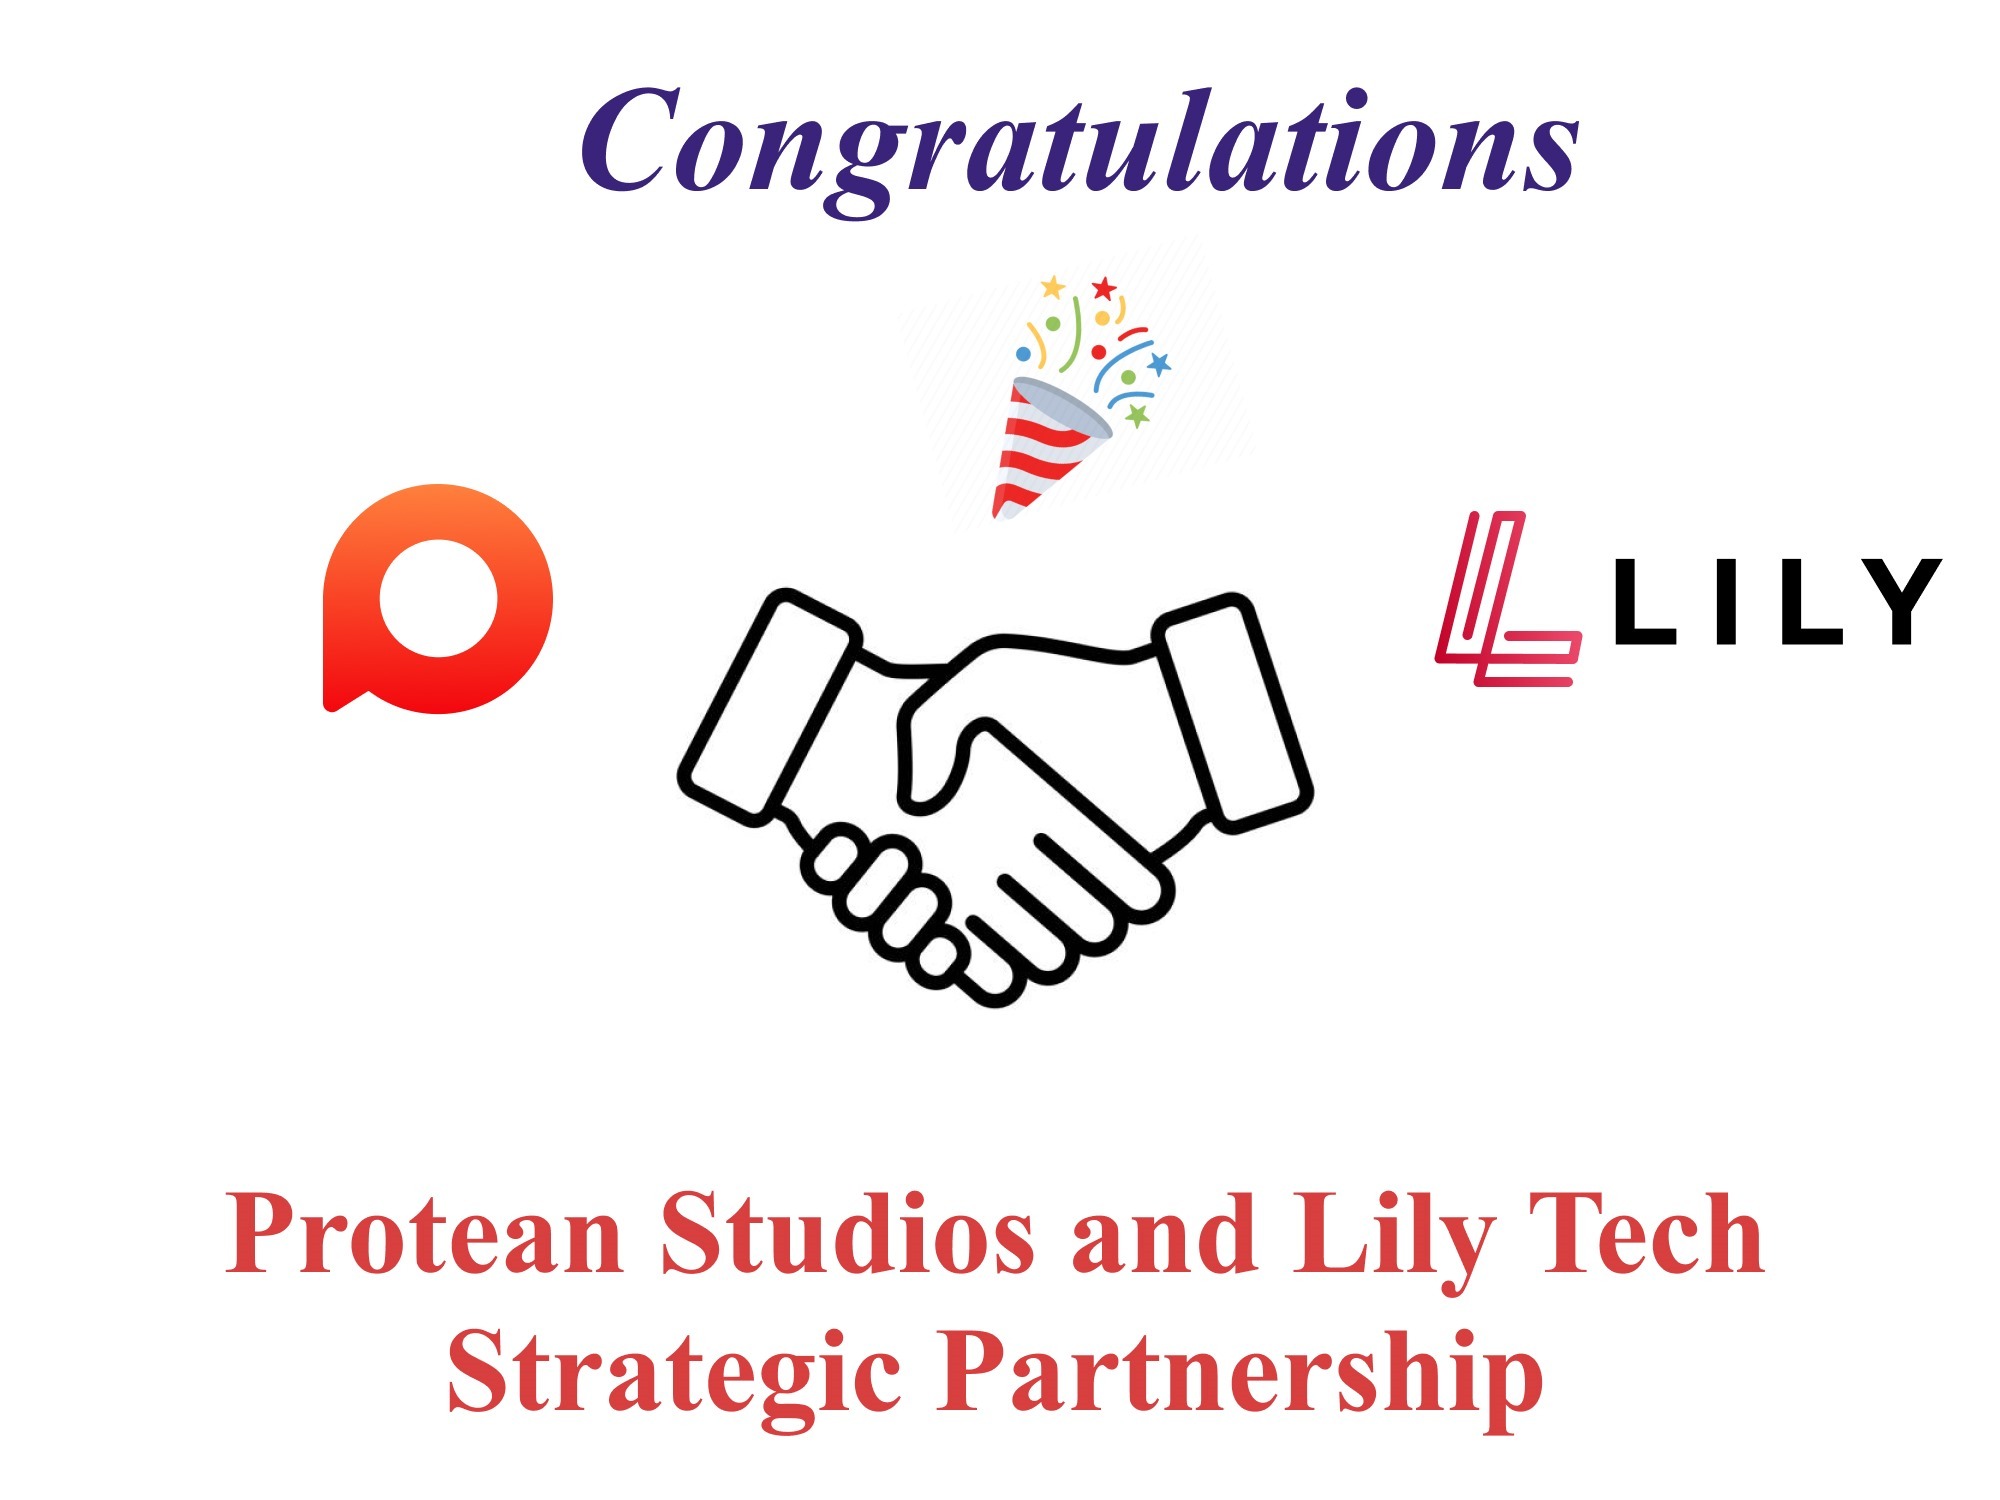 Protean Studios and Lily Tech are a strategic partnership